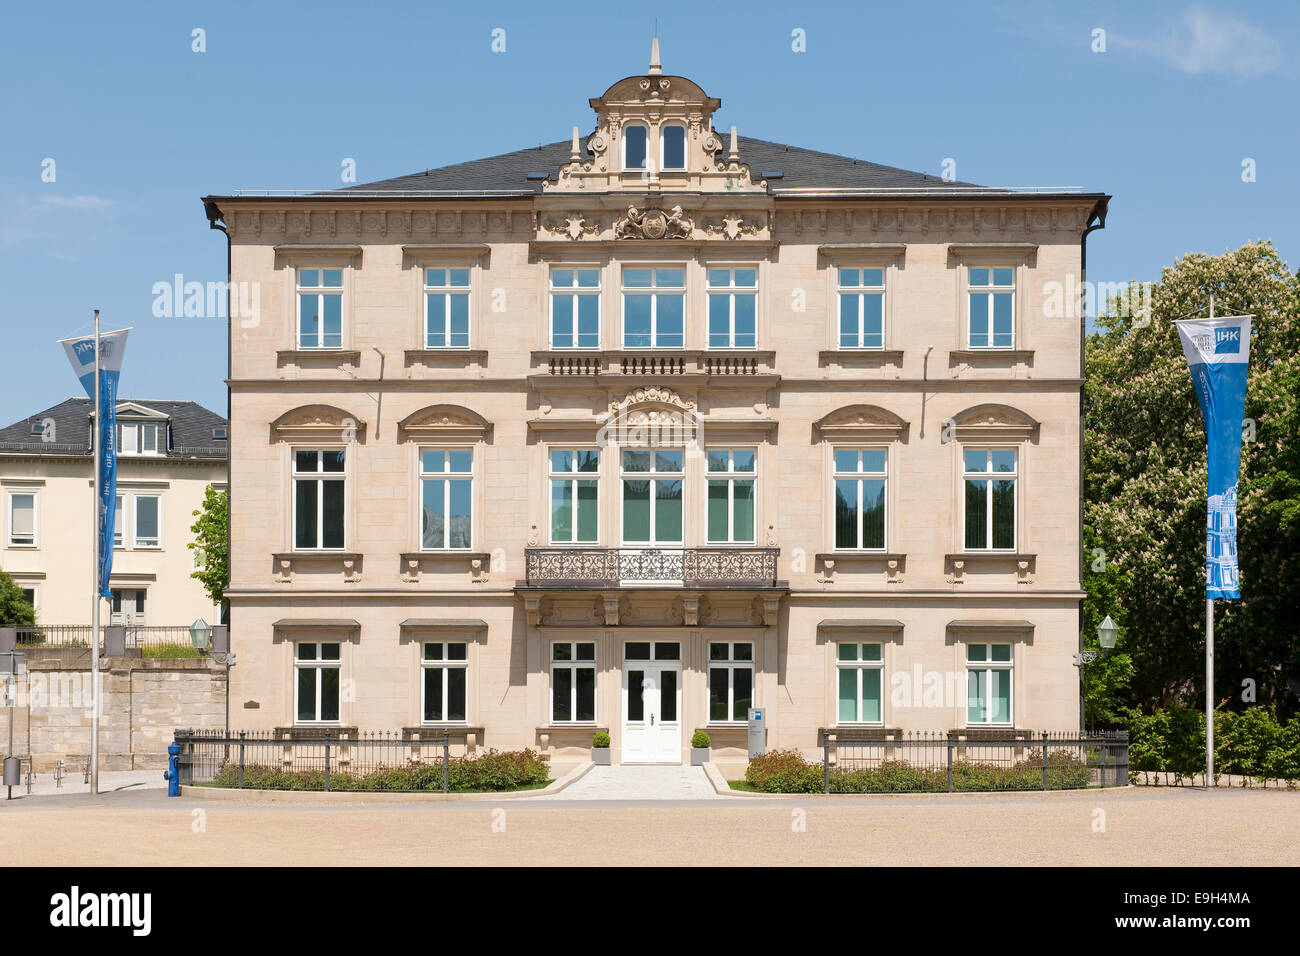 Edinburgh Palace, seat of the Chamber of Commerce and Industry in Coburg, Coburg, Upper Franconia, Bavaria, Germany Stock Photo